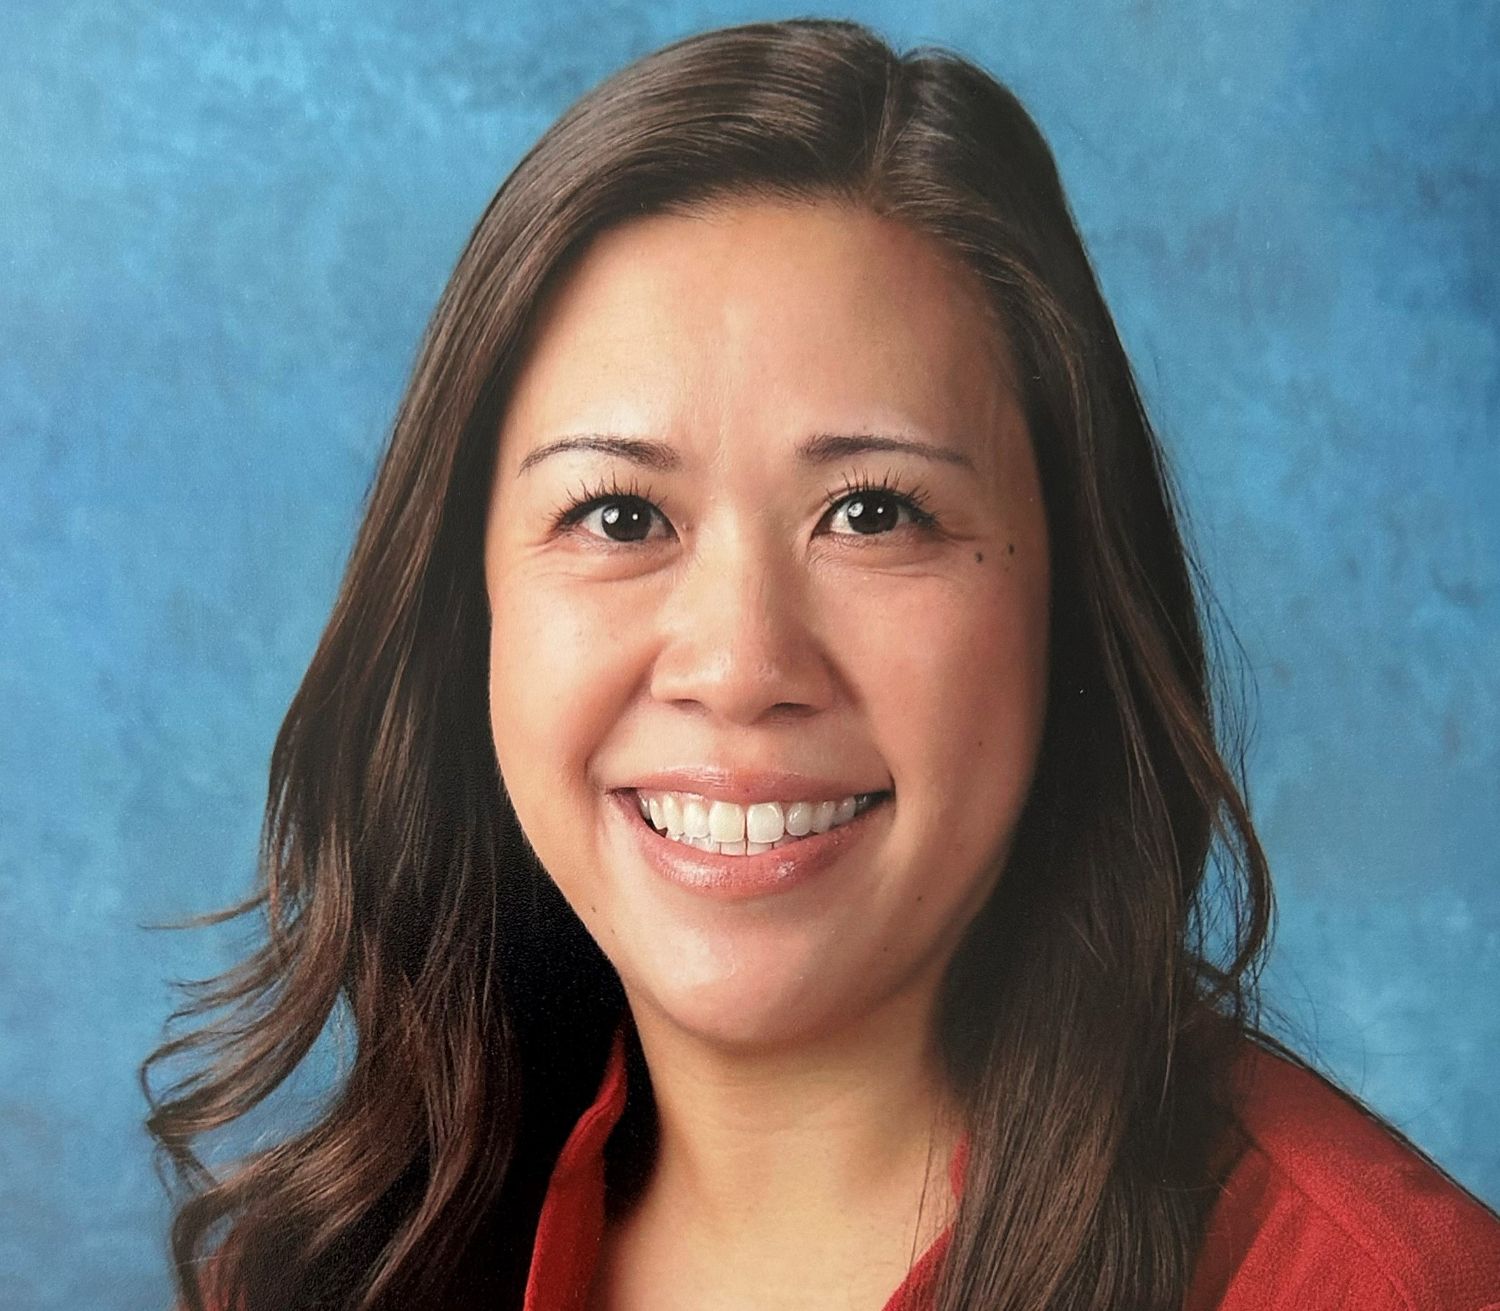 PHOTO: provided by Noelle Fong | The South Pasadenan | Noelle Fong will serve as the new principal at Marengo Elementary School in South Pasadena.